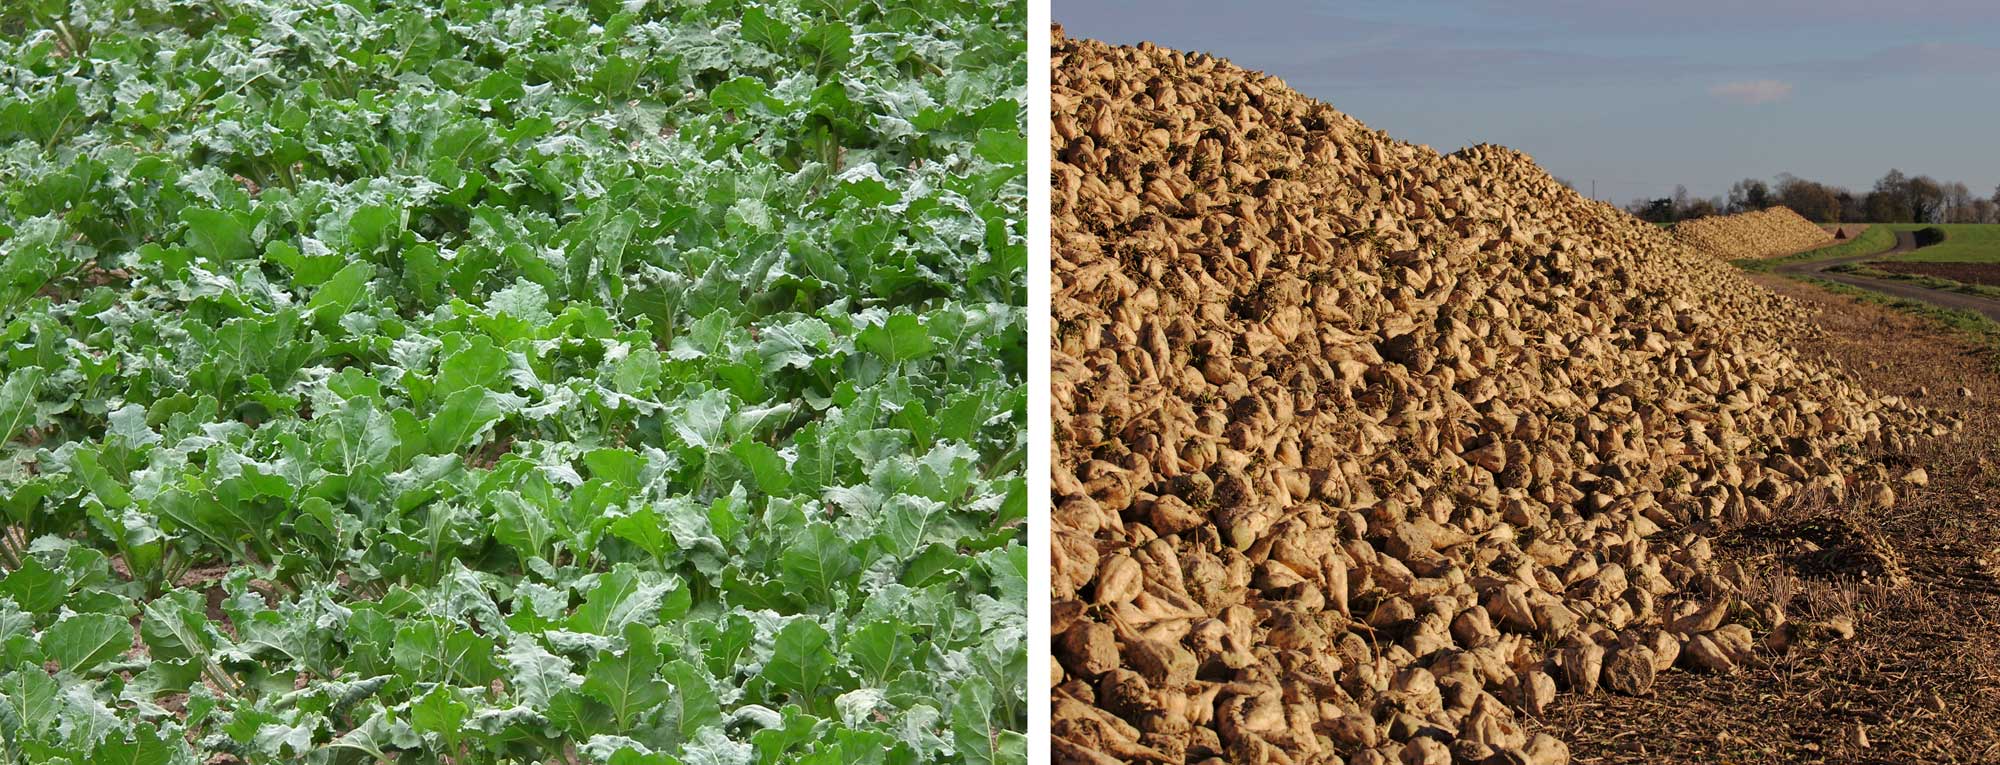 2-panel image of sugar beets. Panel 1: Photograph of a field of sugar beets, showing their large green leaves. Panel 2: Photograph of piles of brown sugar beet roots. 